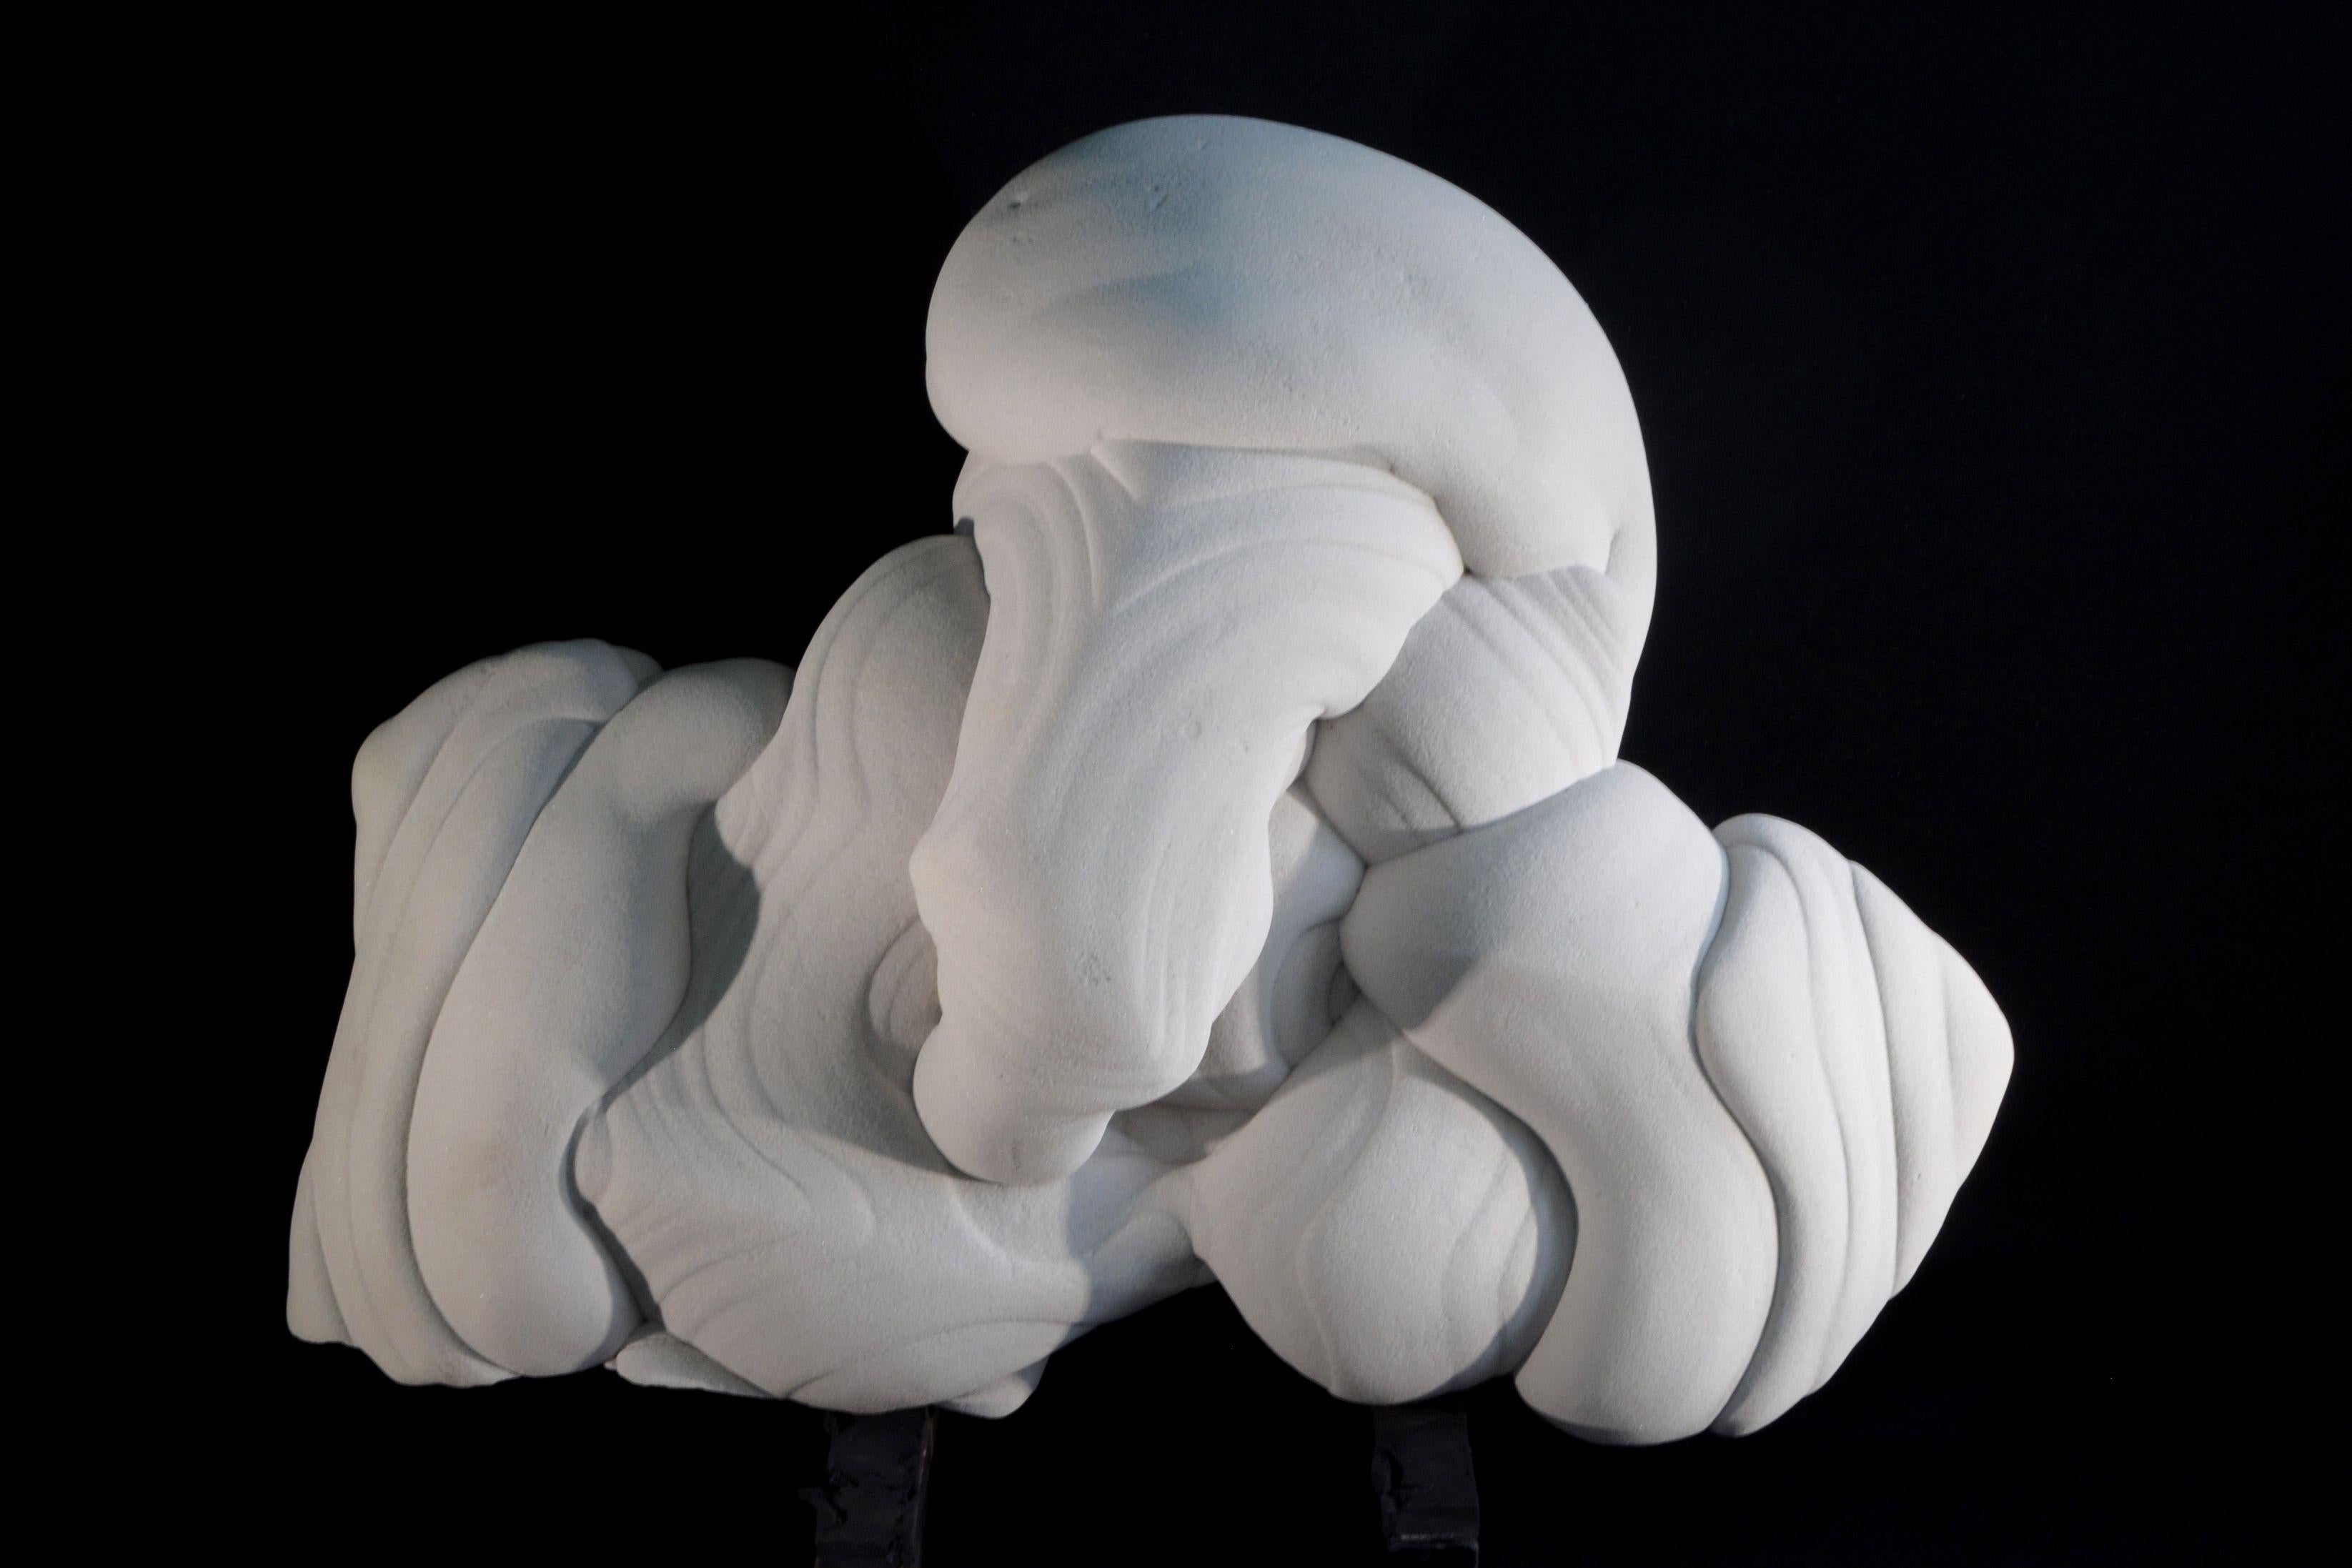 Gogotte Formation (Natural Sandstone Concretion) Abstract Sculpture - First Journey